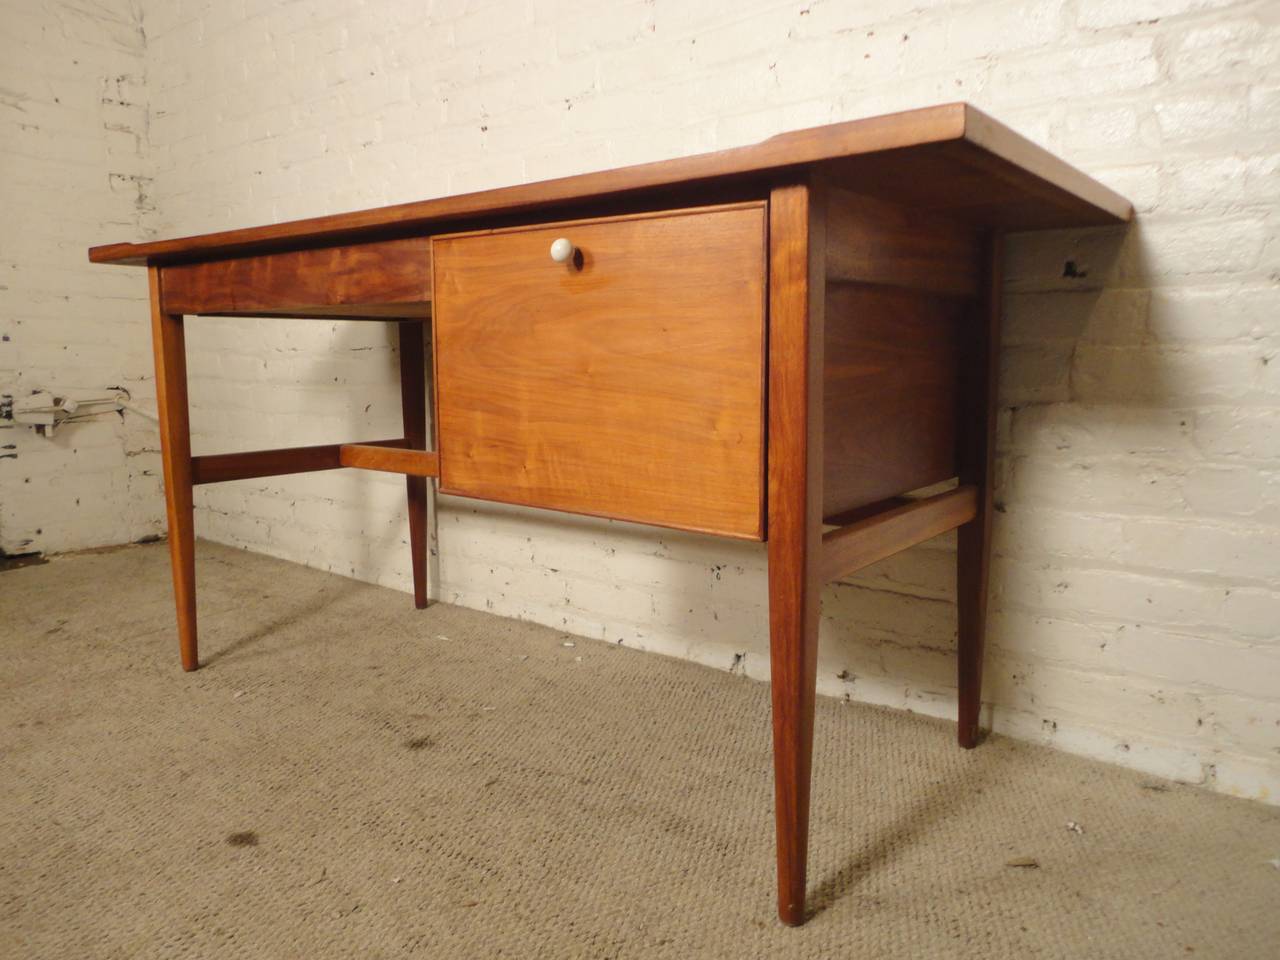 Vintage modern writing desk designed by Kipp Stewart for Drexel. Beautiful walnut grain with two drawers. Simple lines, sculpted legs, curved edge and finished back.
Kneehole: 27